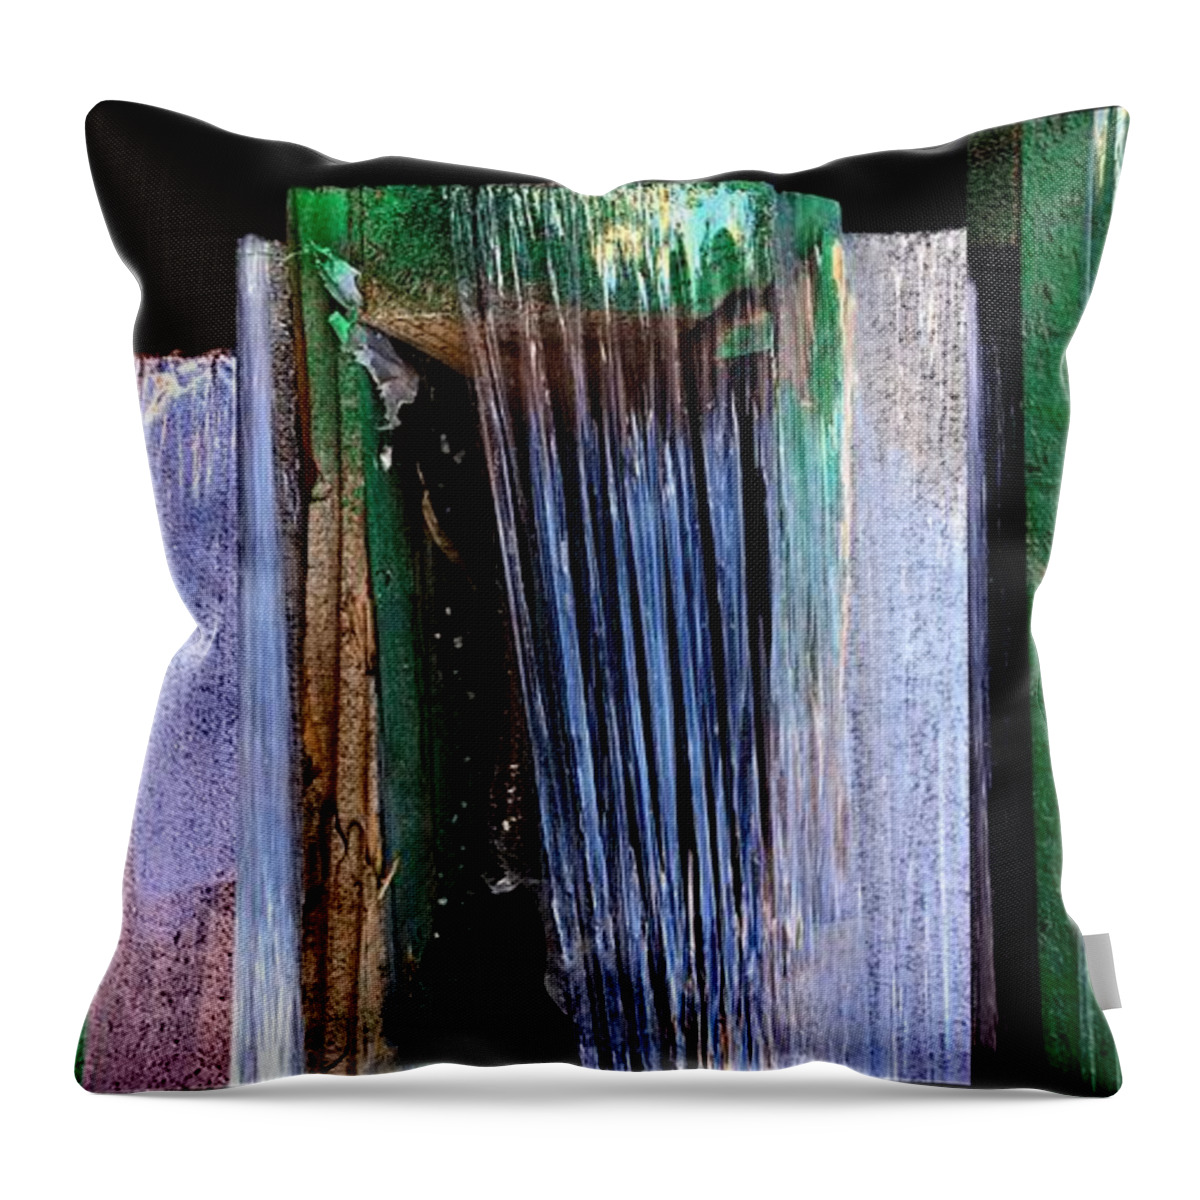 Abstracts Throw Pillow featuring the painting Building Supply Abstracts by Marlene Burns